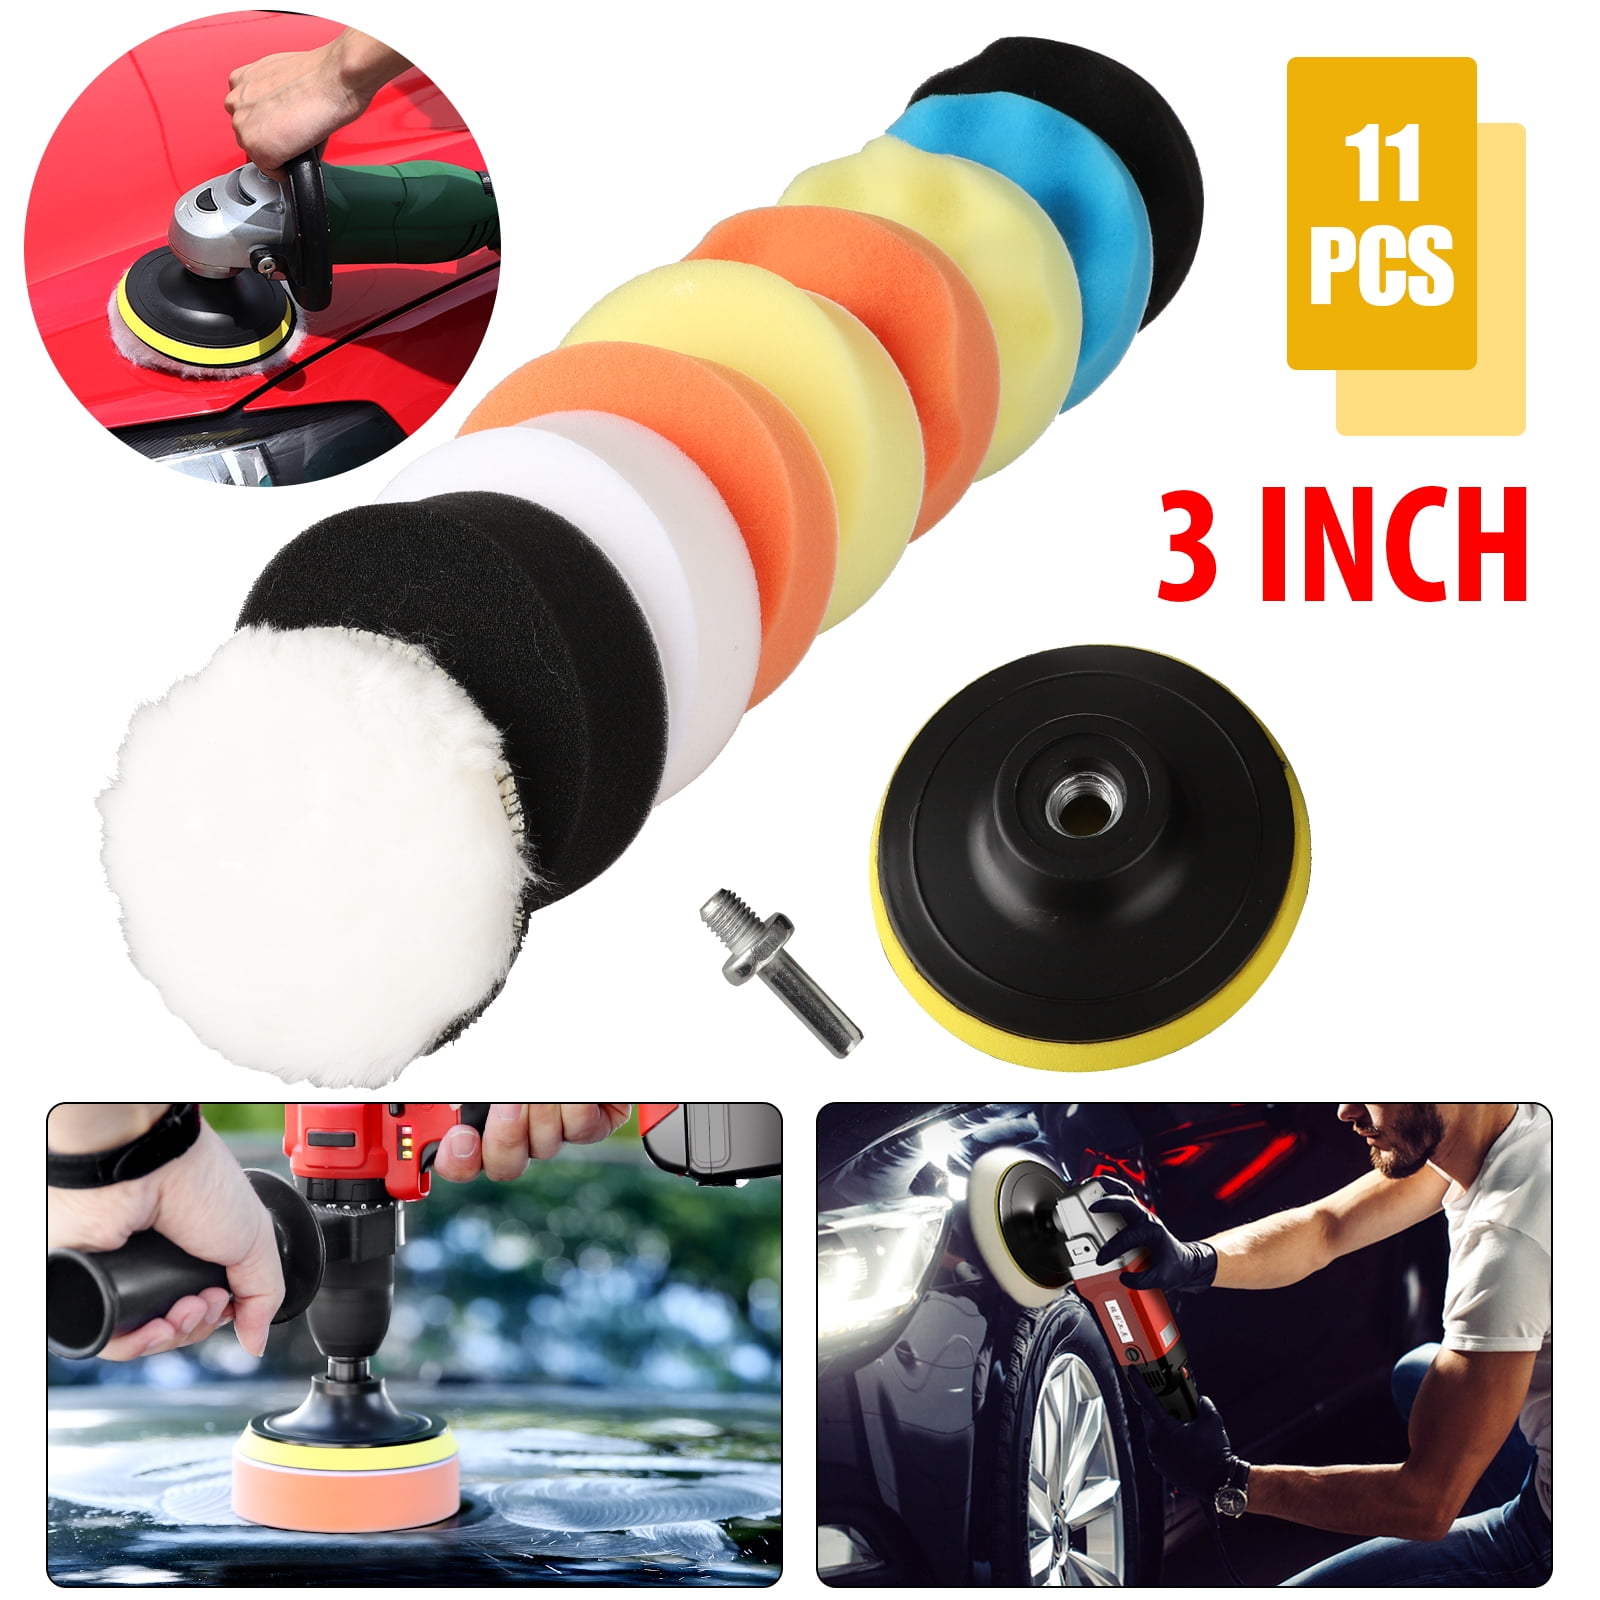 Sanding Waxing yidenguk Polishing Pads for Drill Polishing Sponge Pads with 2pcs M10 Drill Adapters for Car Polishing 31pcs Sponge Wool Polishing Waxing Buffing Pads Kit for Auto Car Polishers 